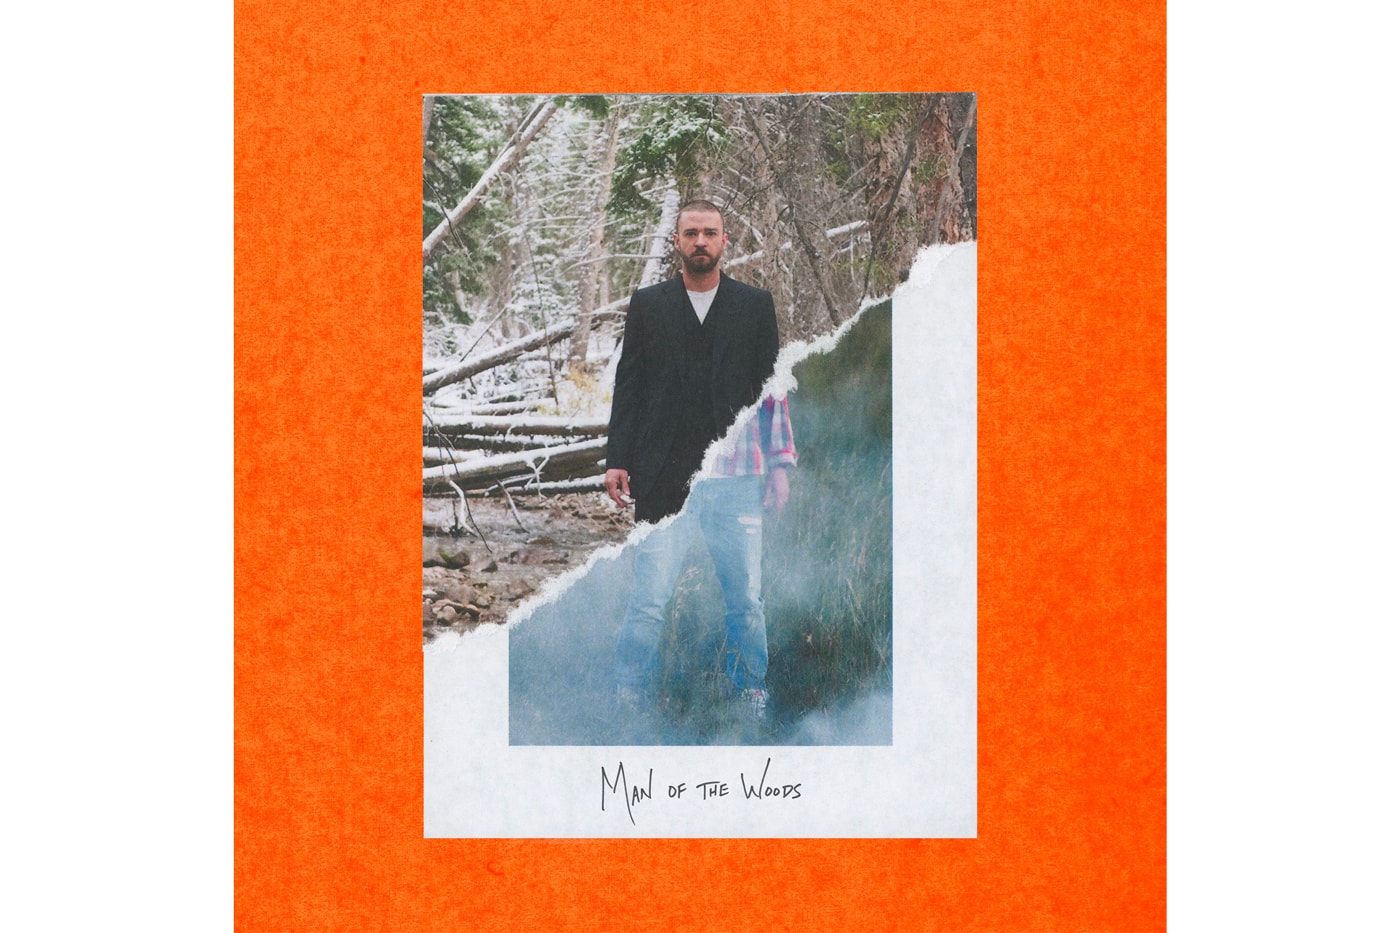 Justin Timberlake Man of the Woods Album Leak Single Music Video EP Mixtape Download Stream Discography 2018 Live Show Performance Tour Dates Album Review Tracklist